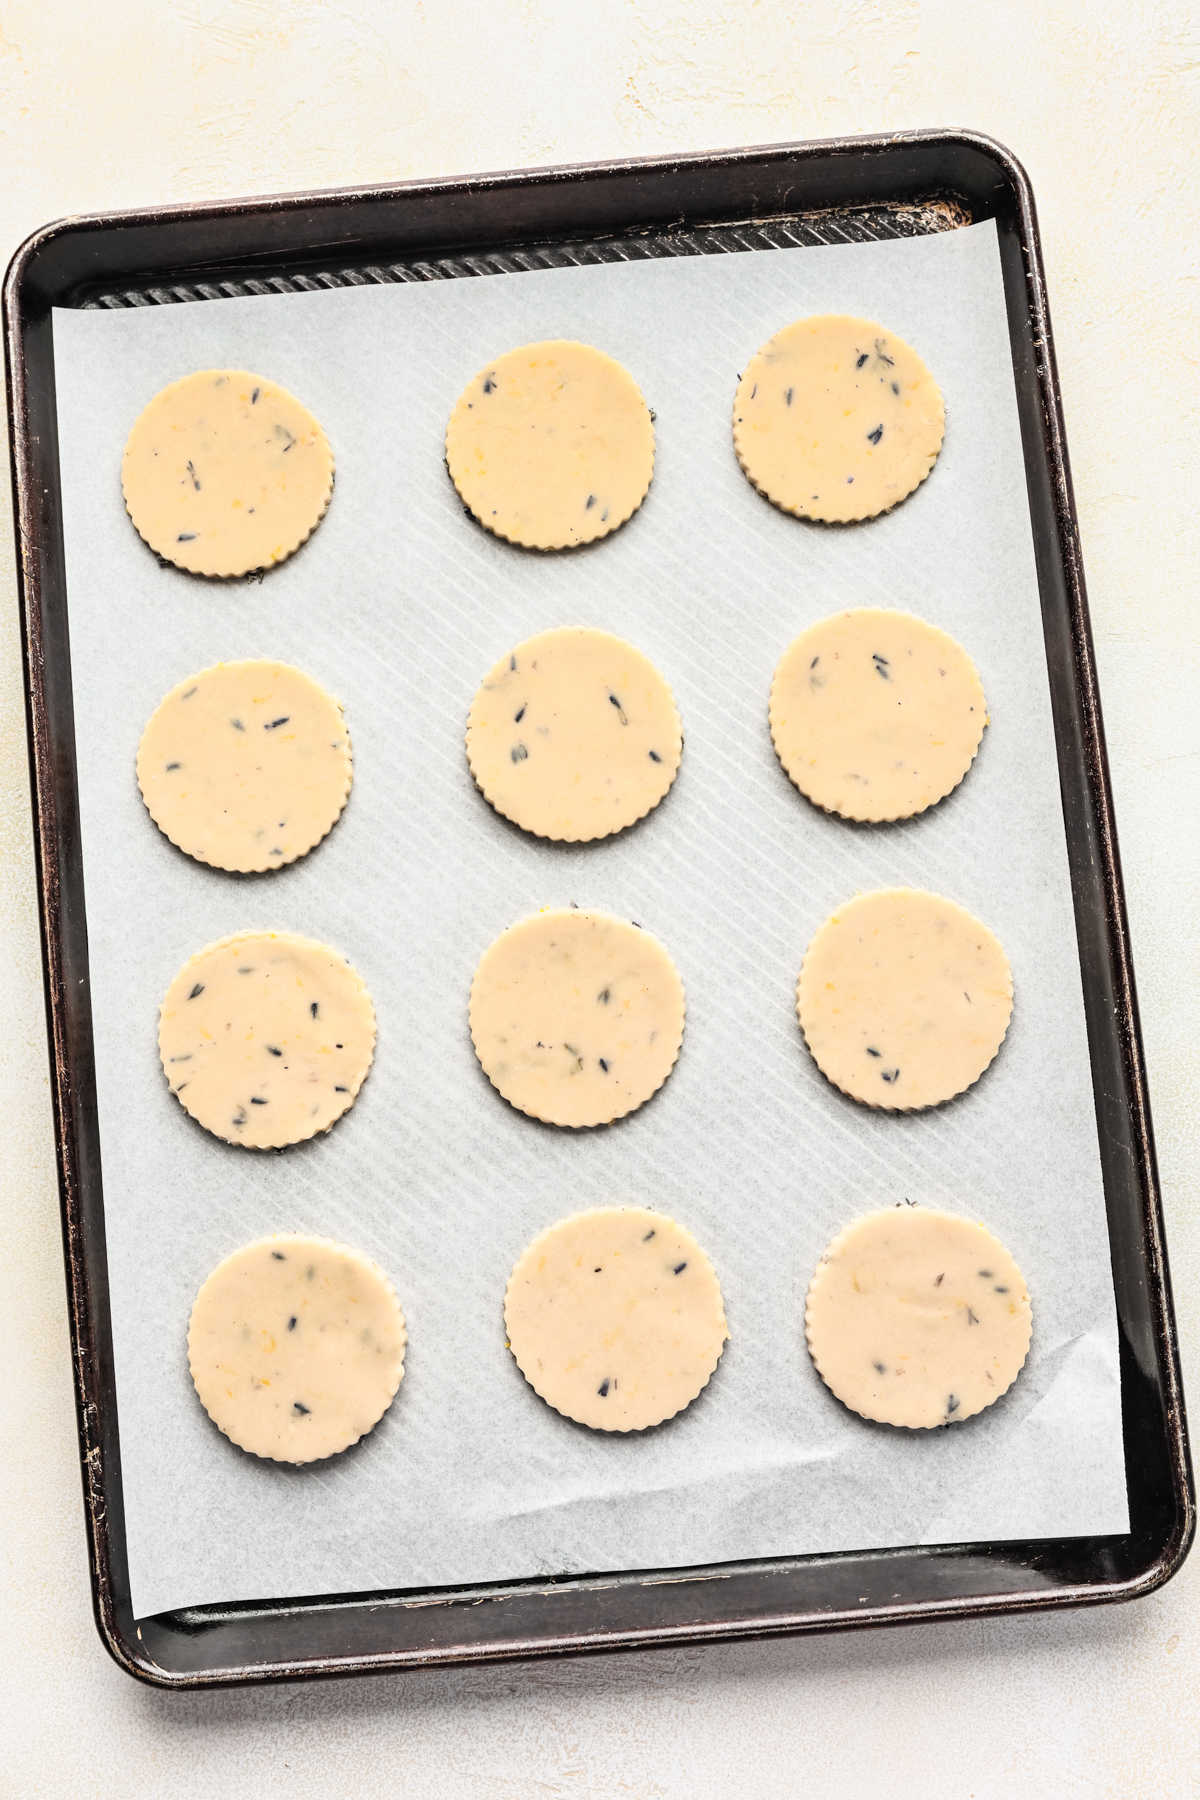 Unbaked lavender cookie dough onto a parchment lined baking sheet.